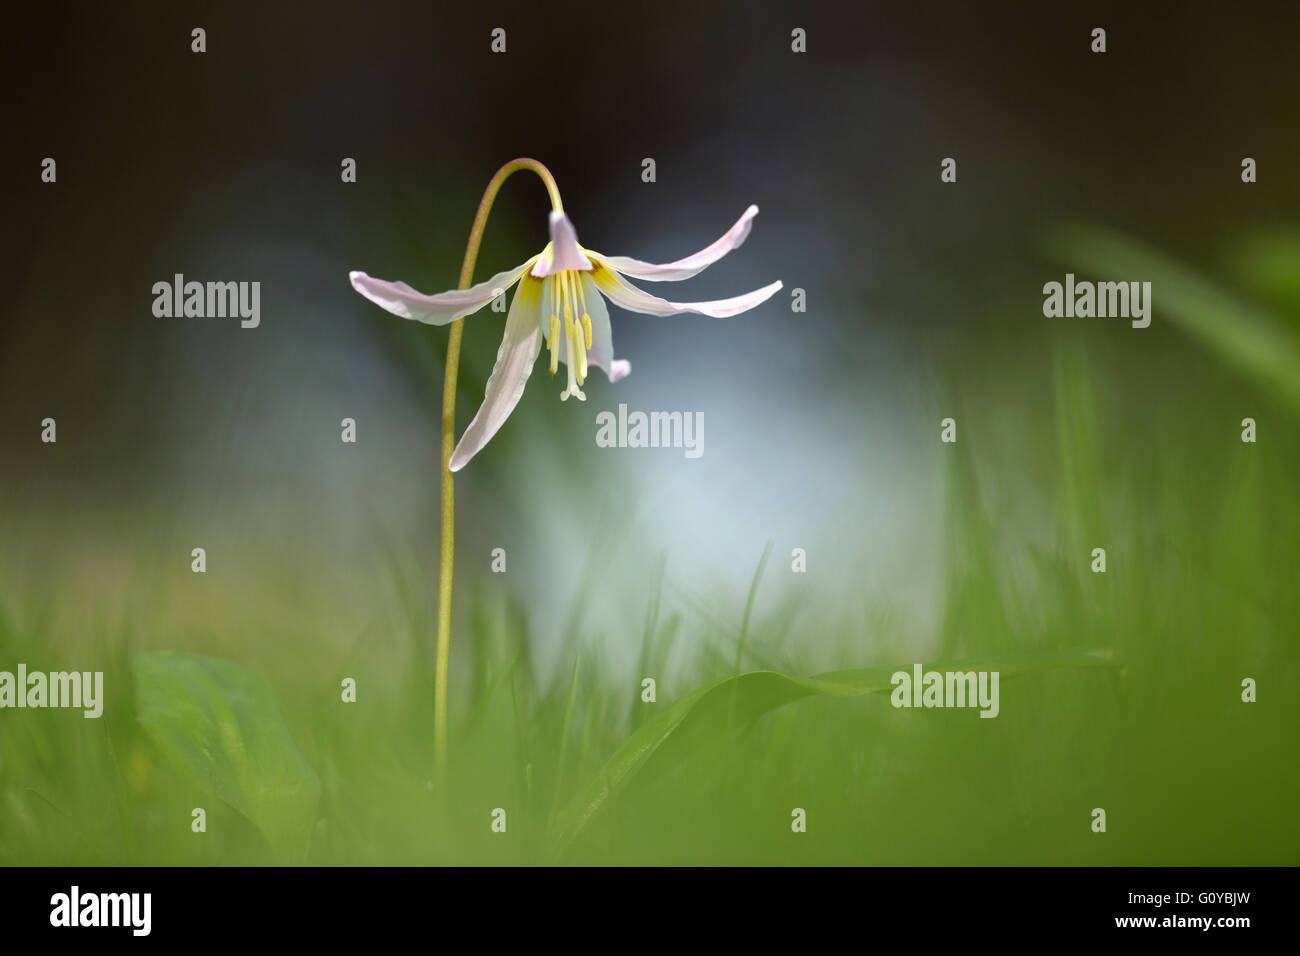 Fawn lily, Erythronium, Erythronium 'Rosalind', Beauty in Nature, Bulb, Colour, Contemporary, Cottage garden plant, Creative, Dogtooth violet, Dreamlike, Edible, Flower, Spring Flowering, Food and Drink, Frost hardy, Growing, Outdoor, Pastel Colour, Plant, Stamen, Trout lily, Unusual plant, Pink, Stock Photo